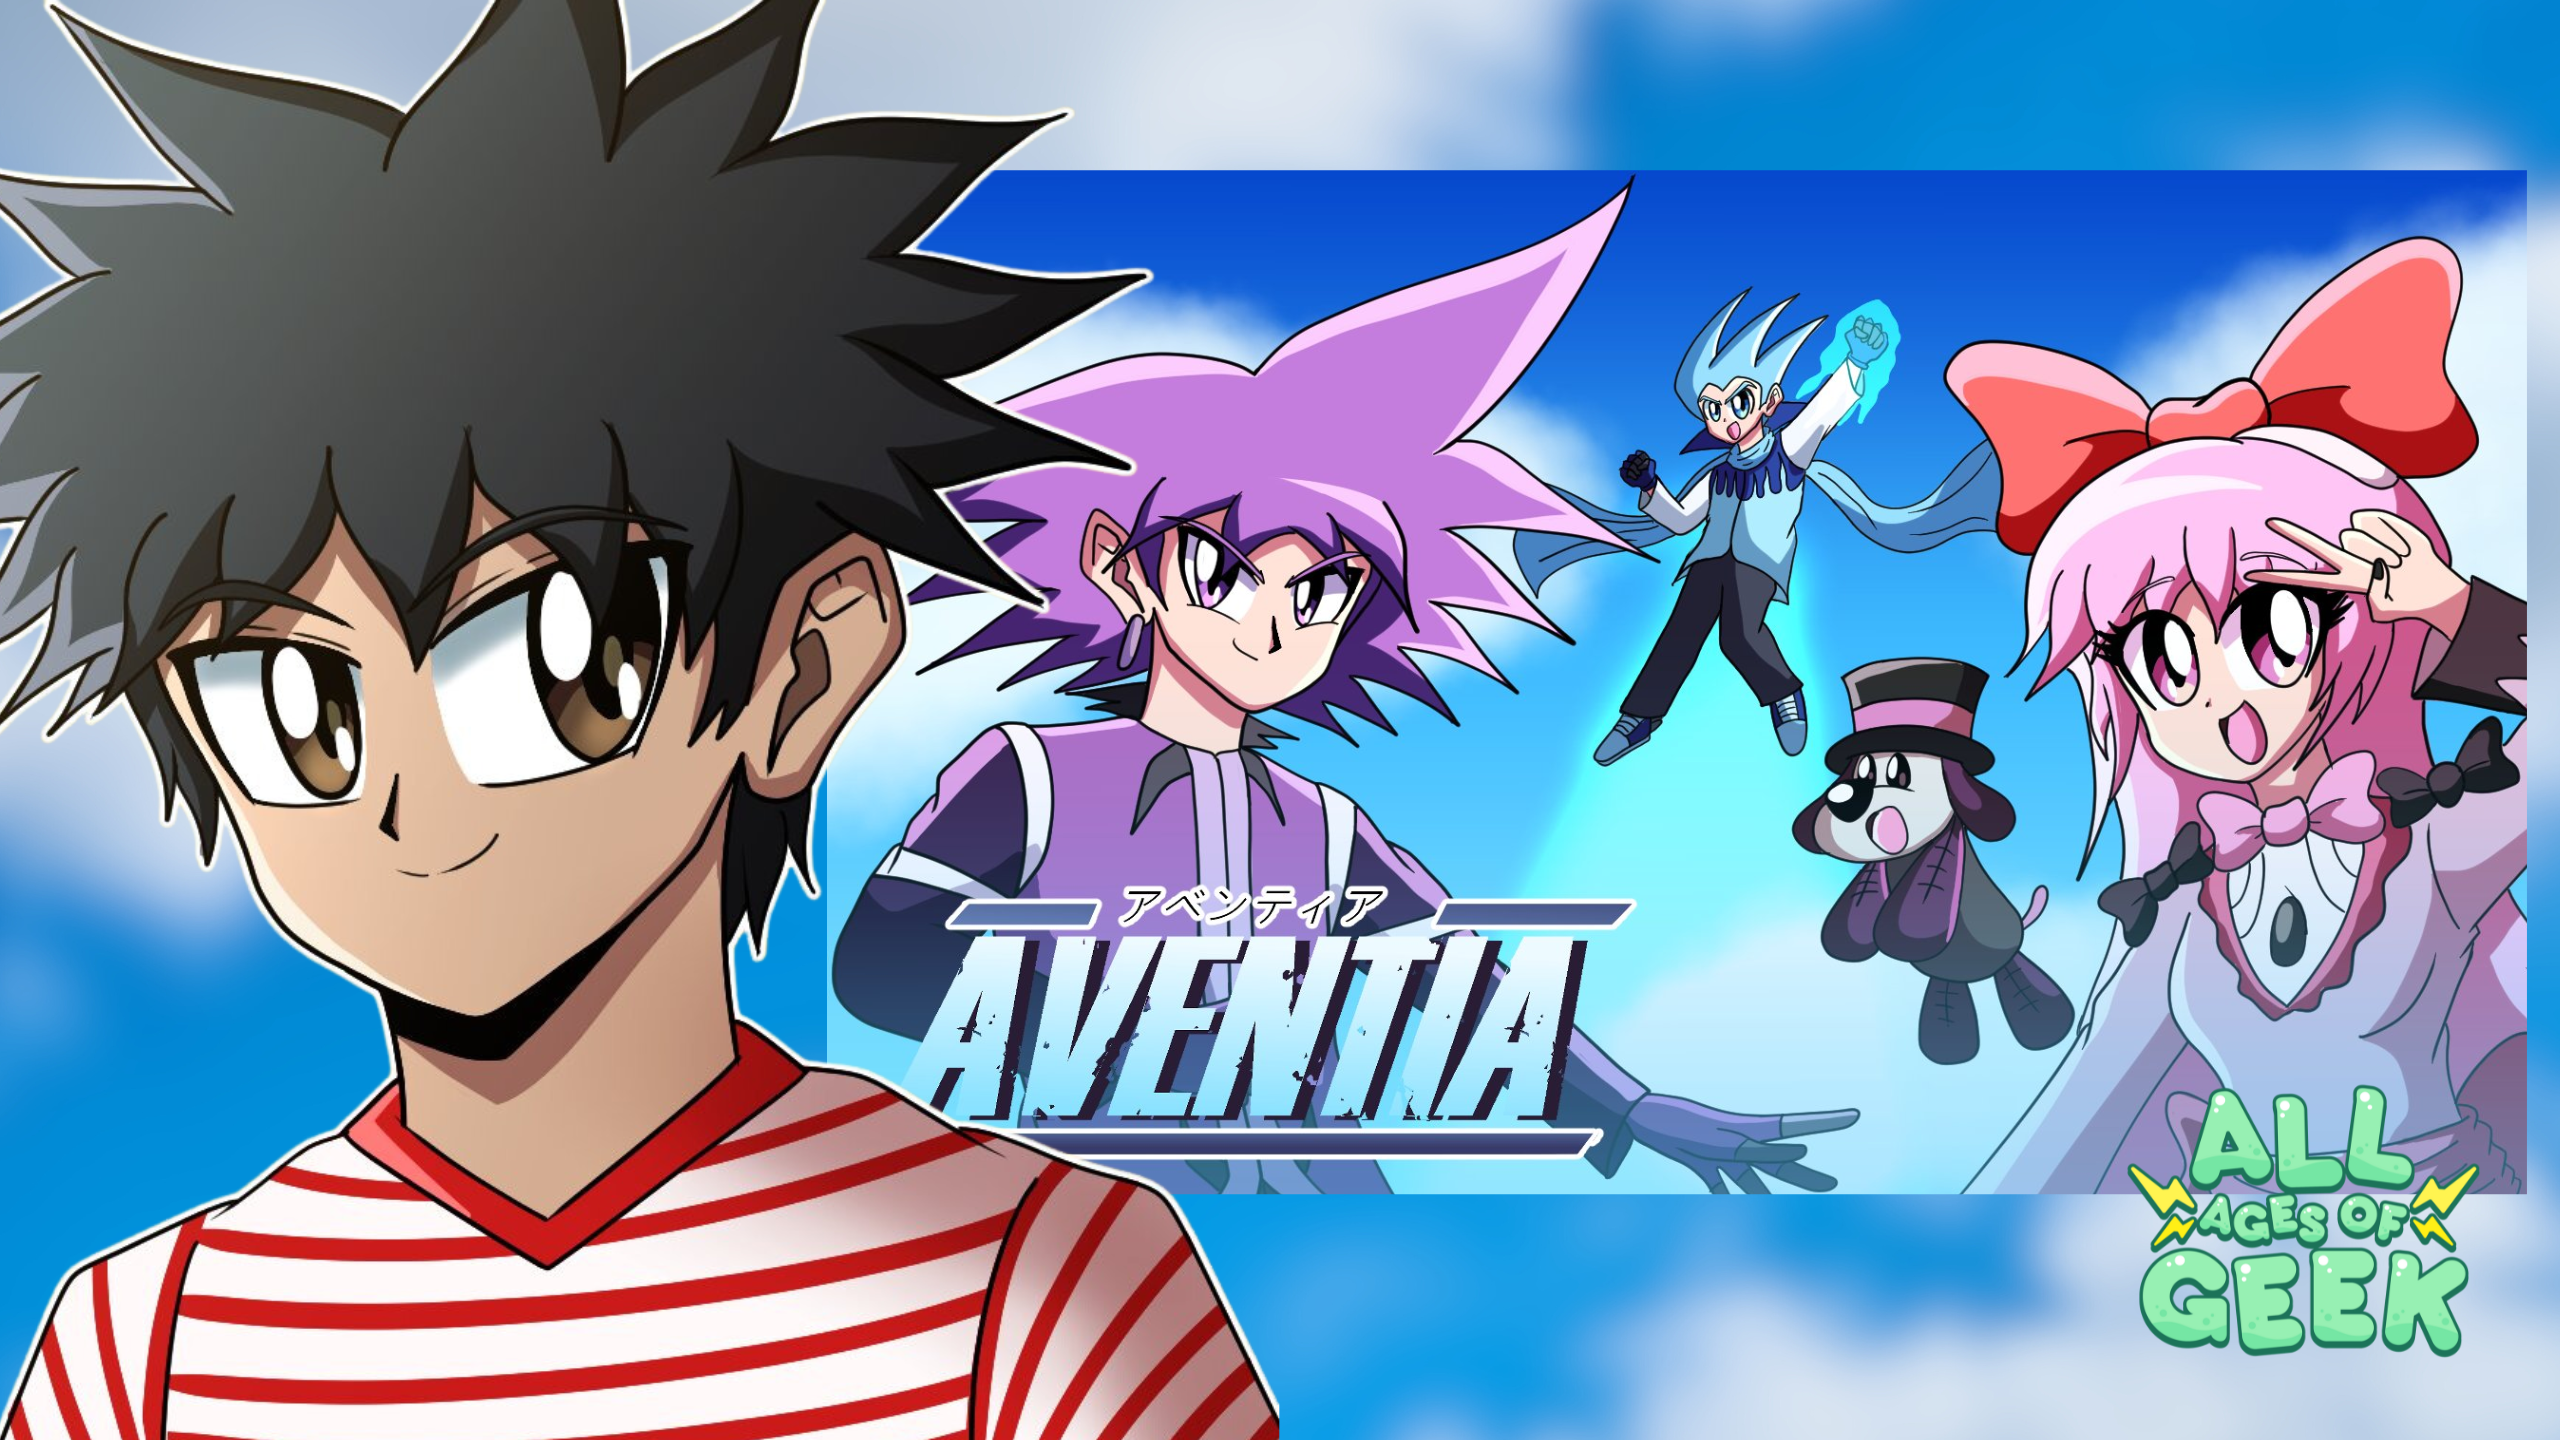 The image is a promotional poster for the series "Aventia," featuring anime-style characters against a blue sky with clouds. The main character on the left is a young boy with spiky black hair and large brown eyes, wearing a red and white striped shirt. To the right, there is a purple-haired character with sharp, confident eyes, and a blue-haired character in a dynamic pose with a glowing blue hand. A girl with pink hair, a big red bow, and a cheerful expression, holding a small dog-like figure with a top hat, is also featured. The title "Aventia" is prominently displayed in the center, with "All Ages of Geek" branding in the bottom right corner.